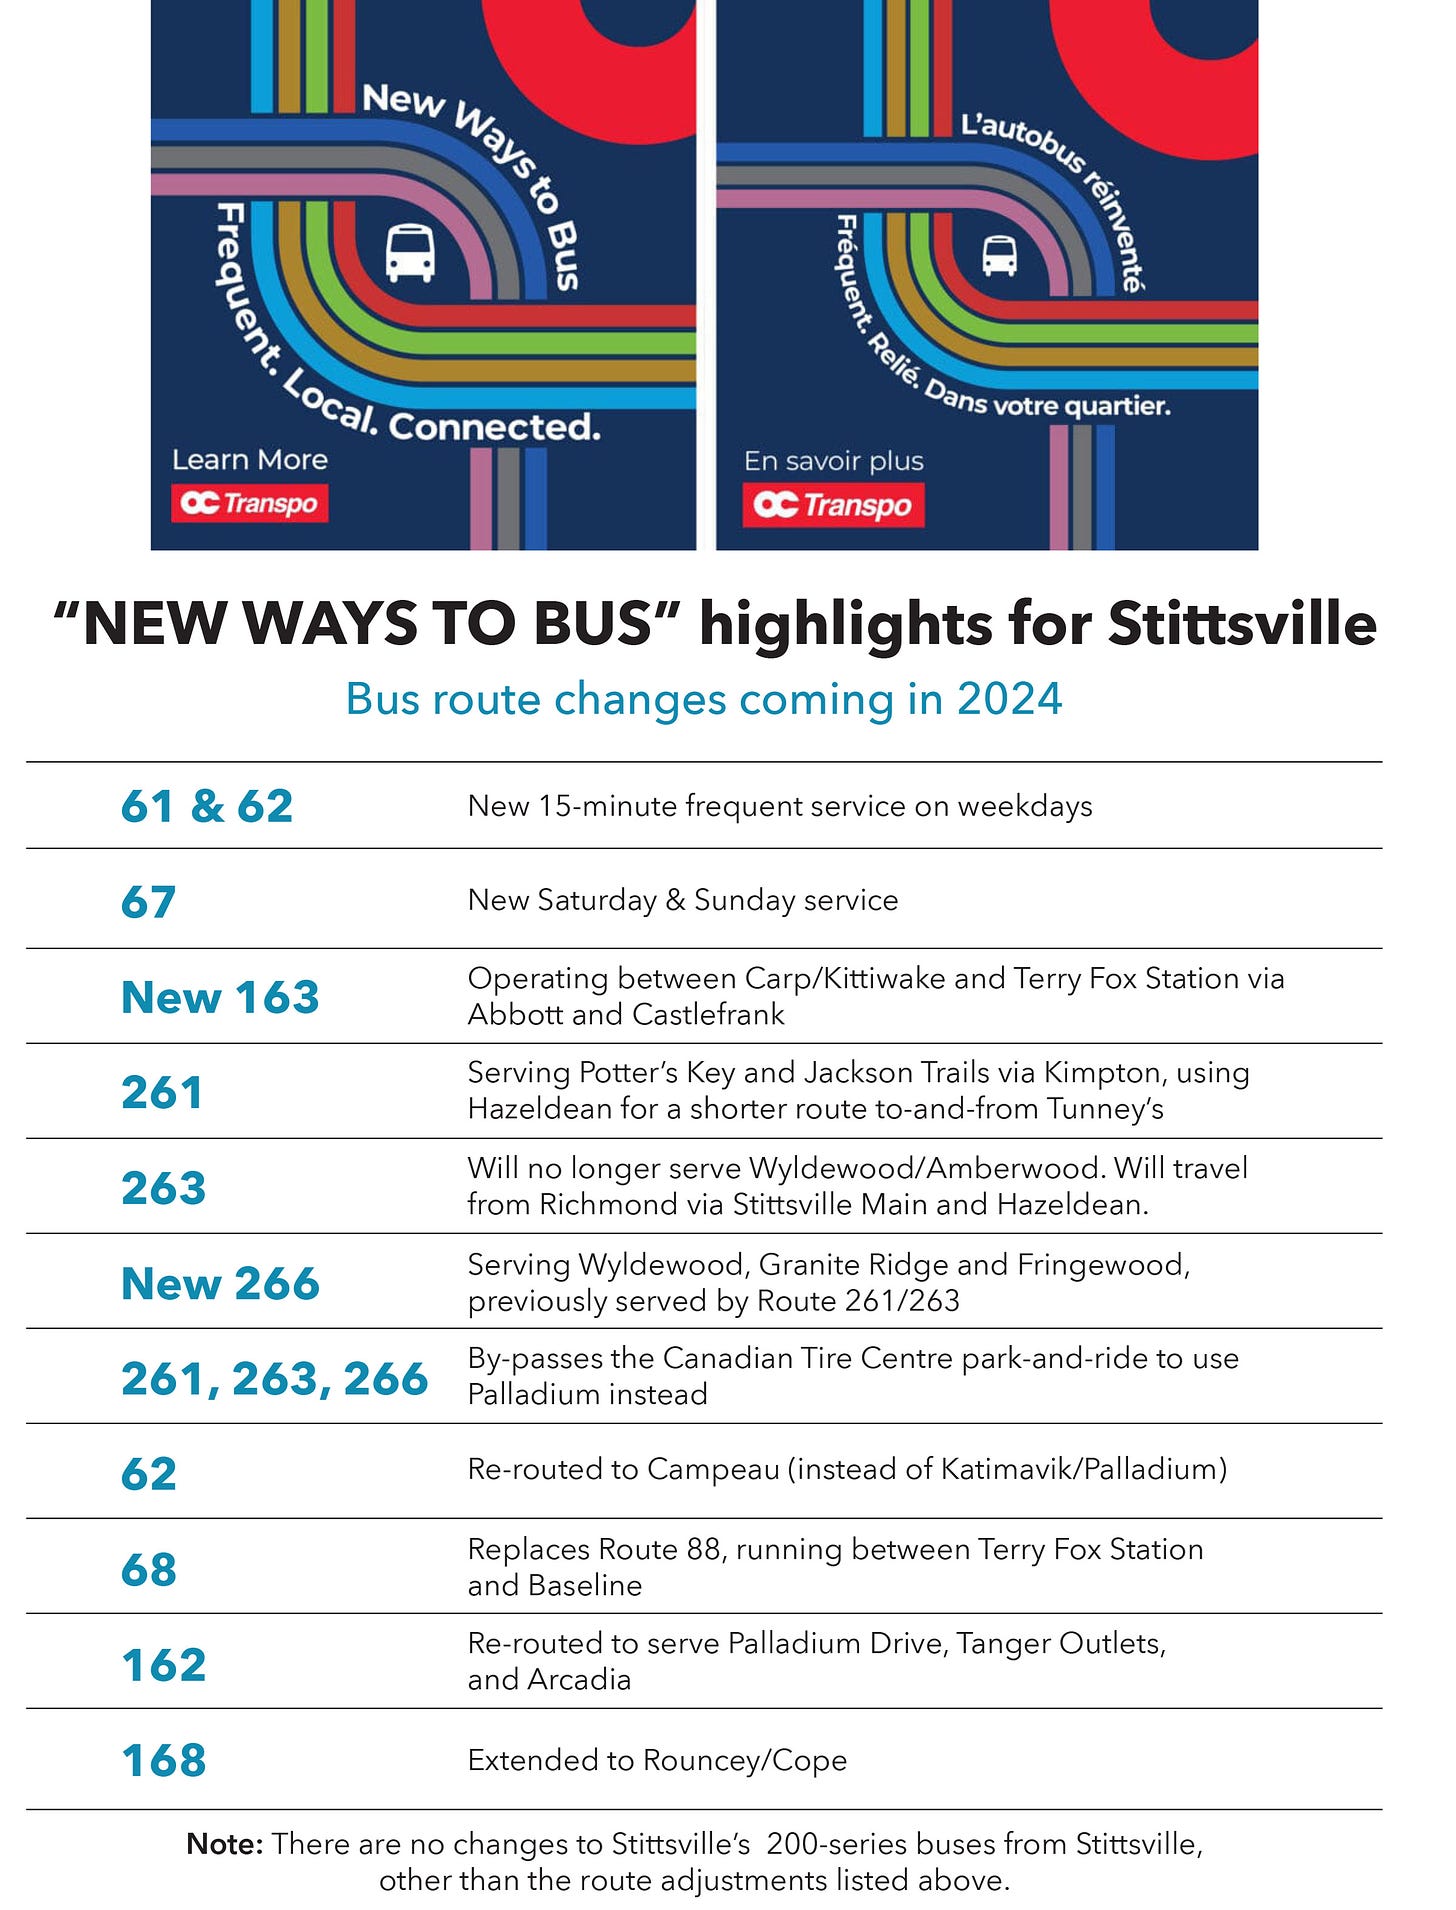 New Ways to Bus highlights for Stittsville